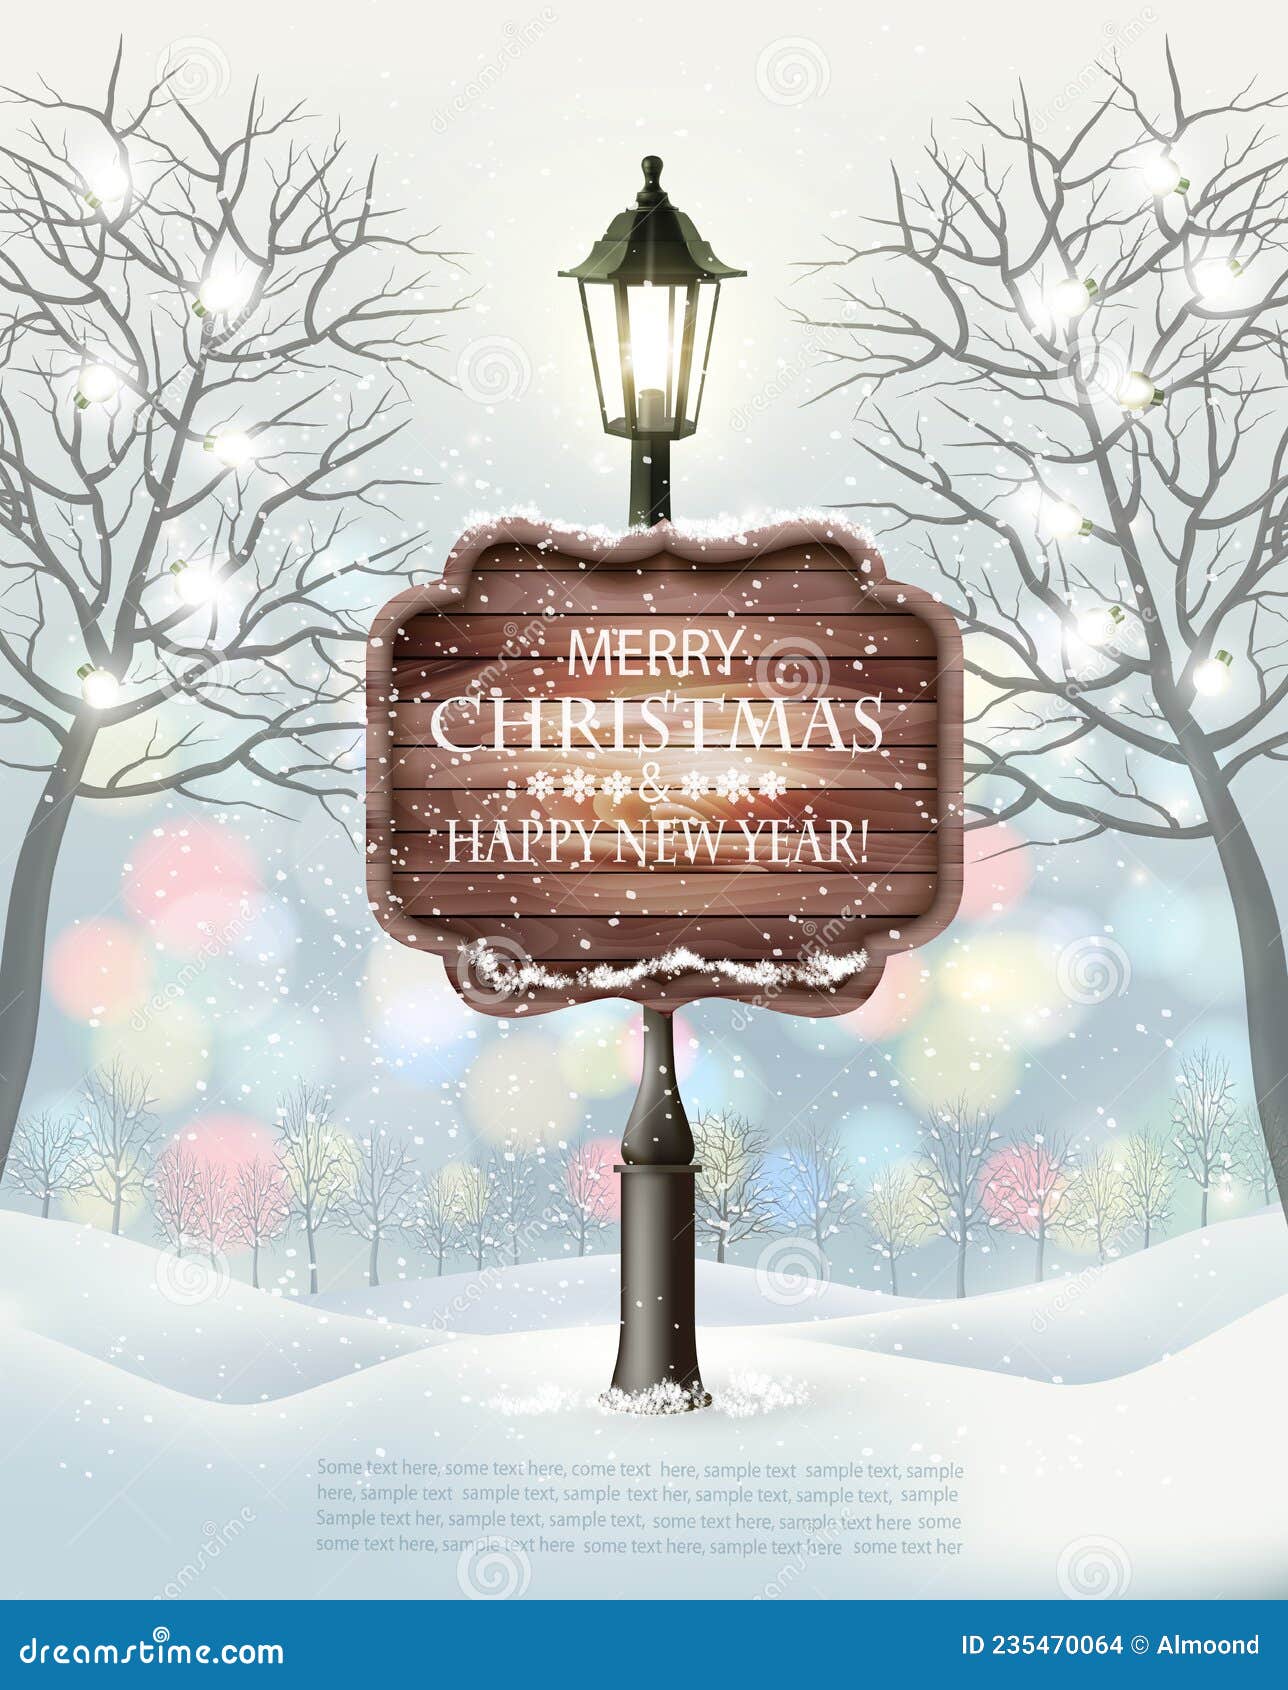 Merry Christmas Party Flyer Background with Winter Landscape and ...